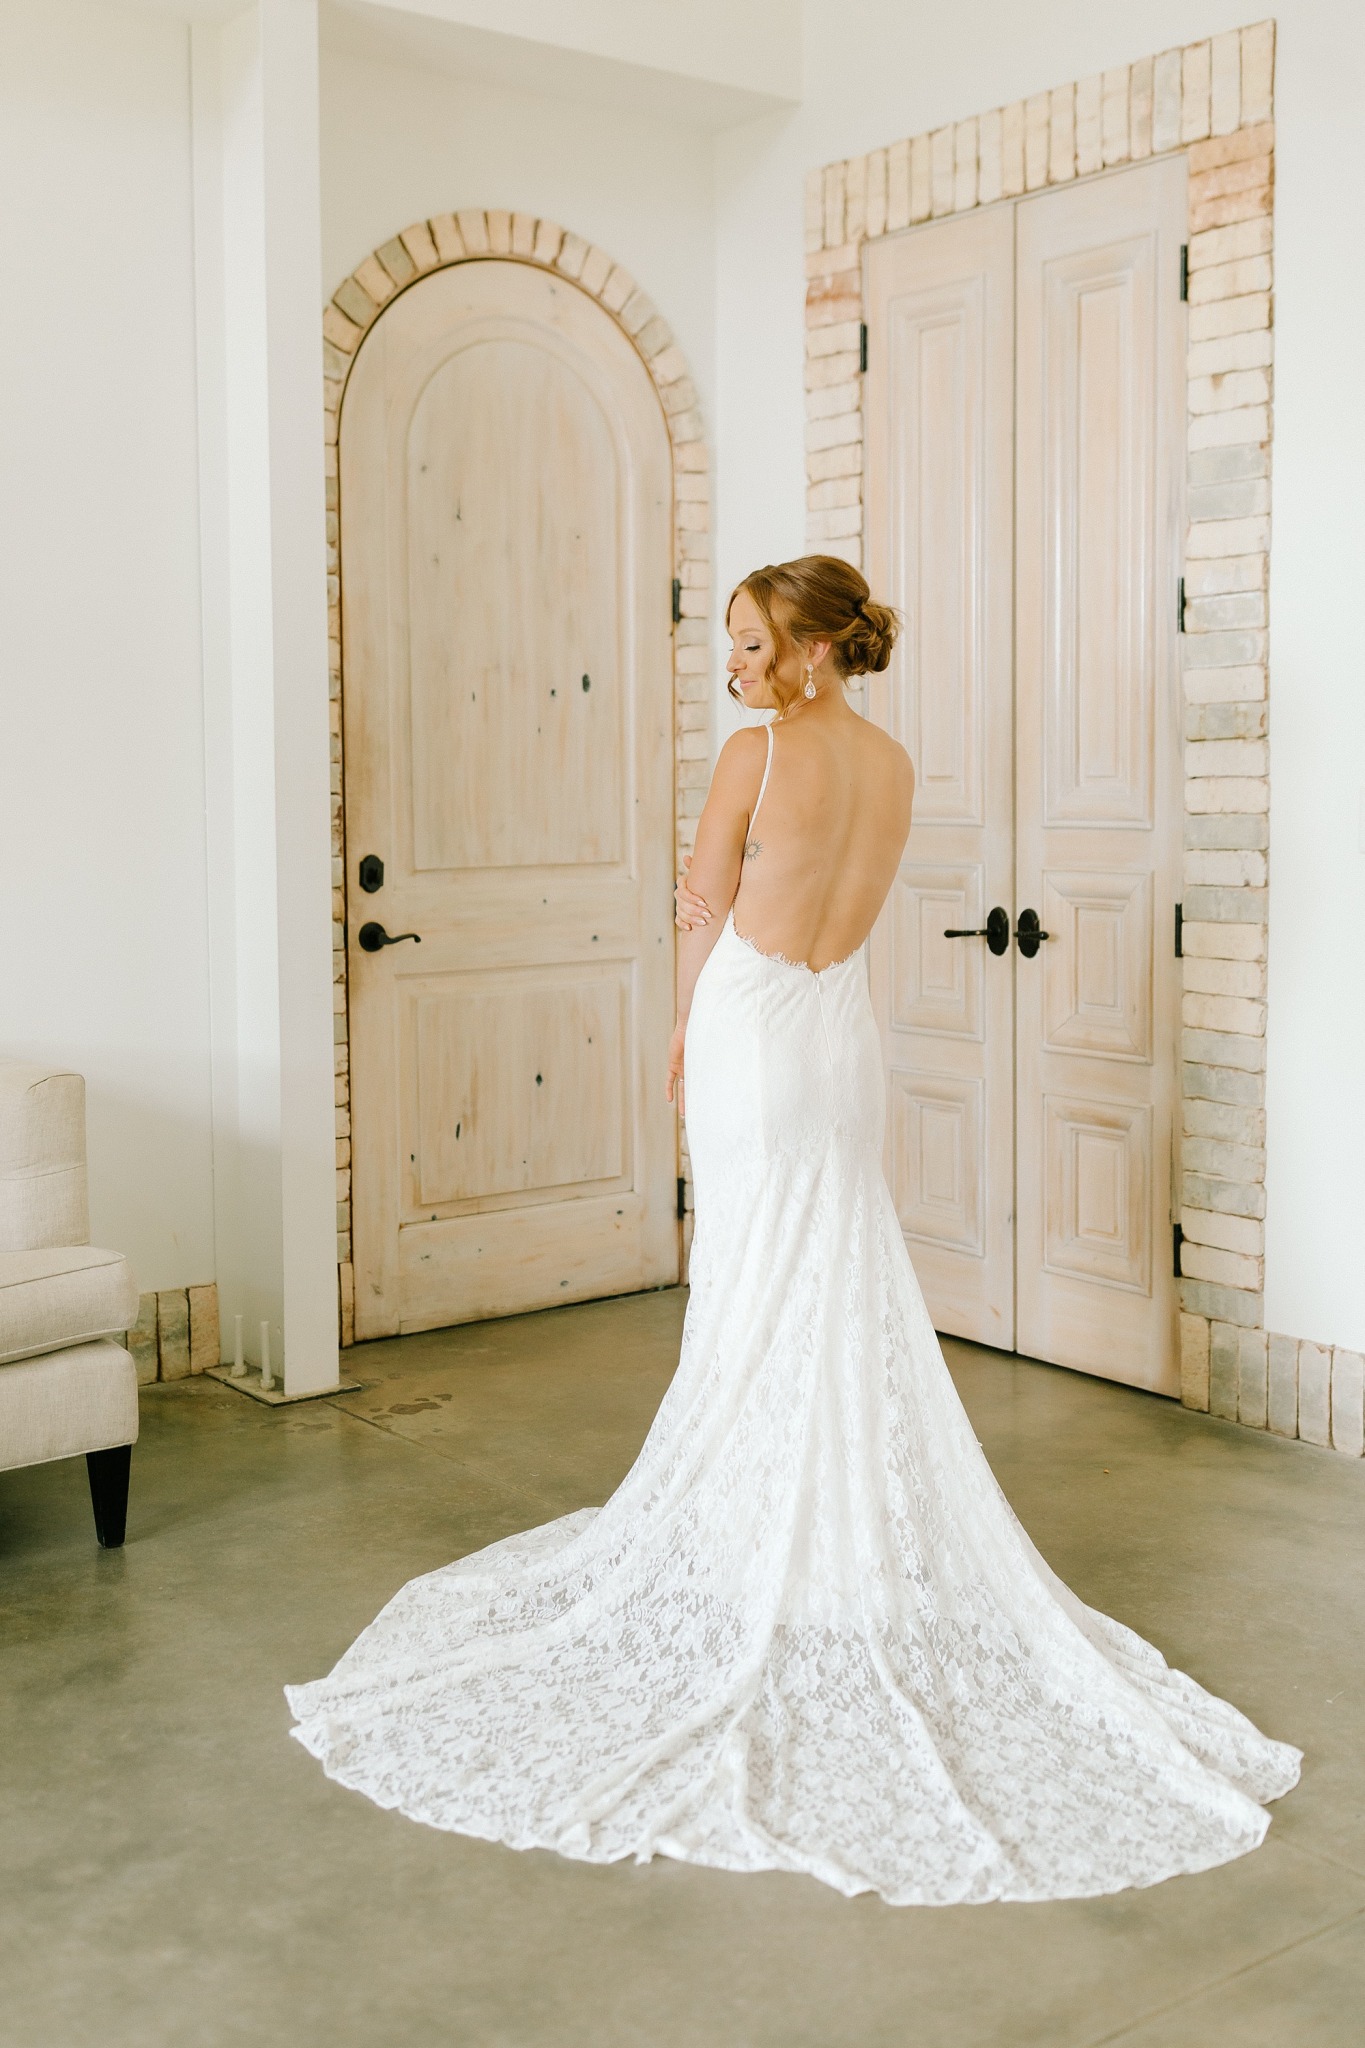 Wrightsville Manor bridal portrait with gown fanned out